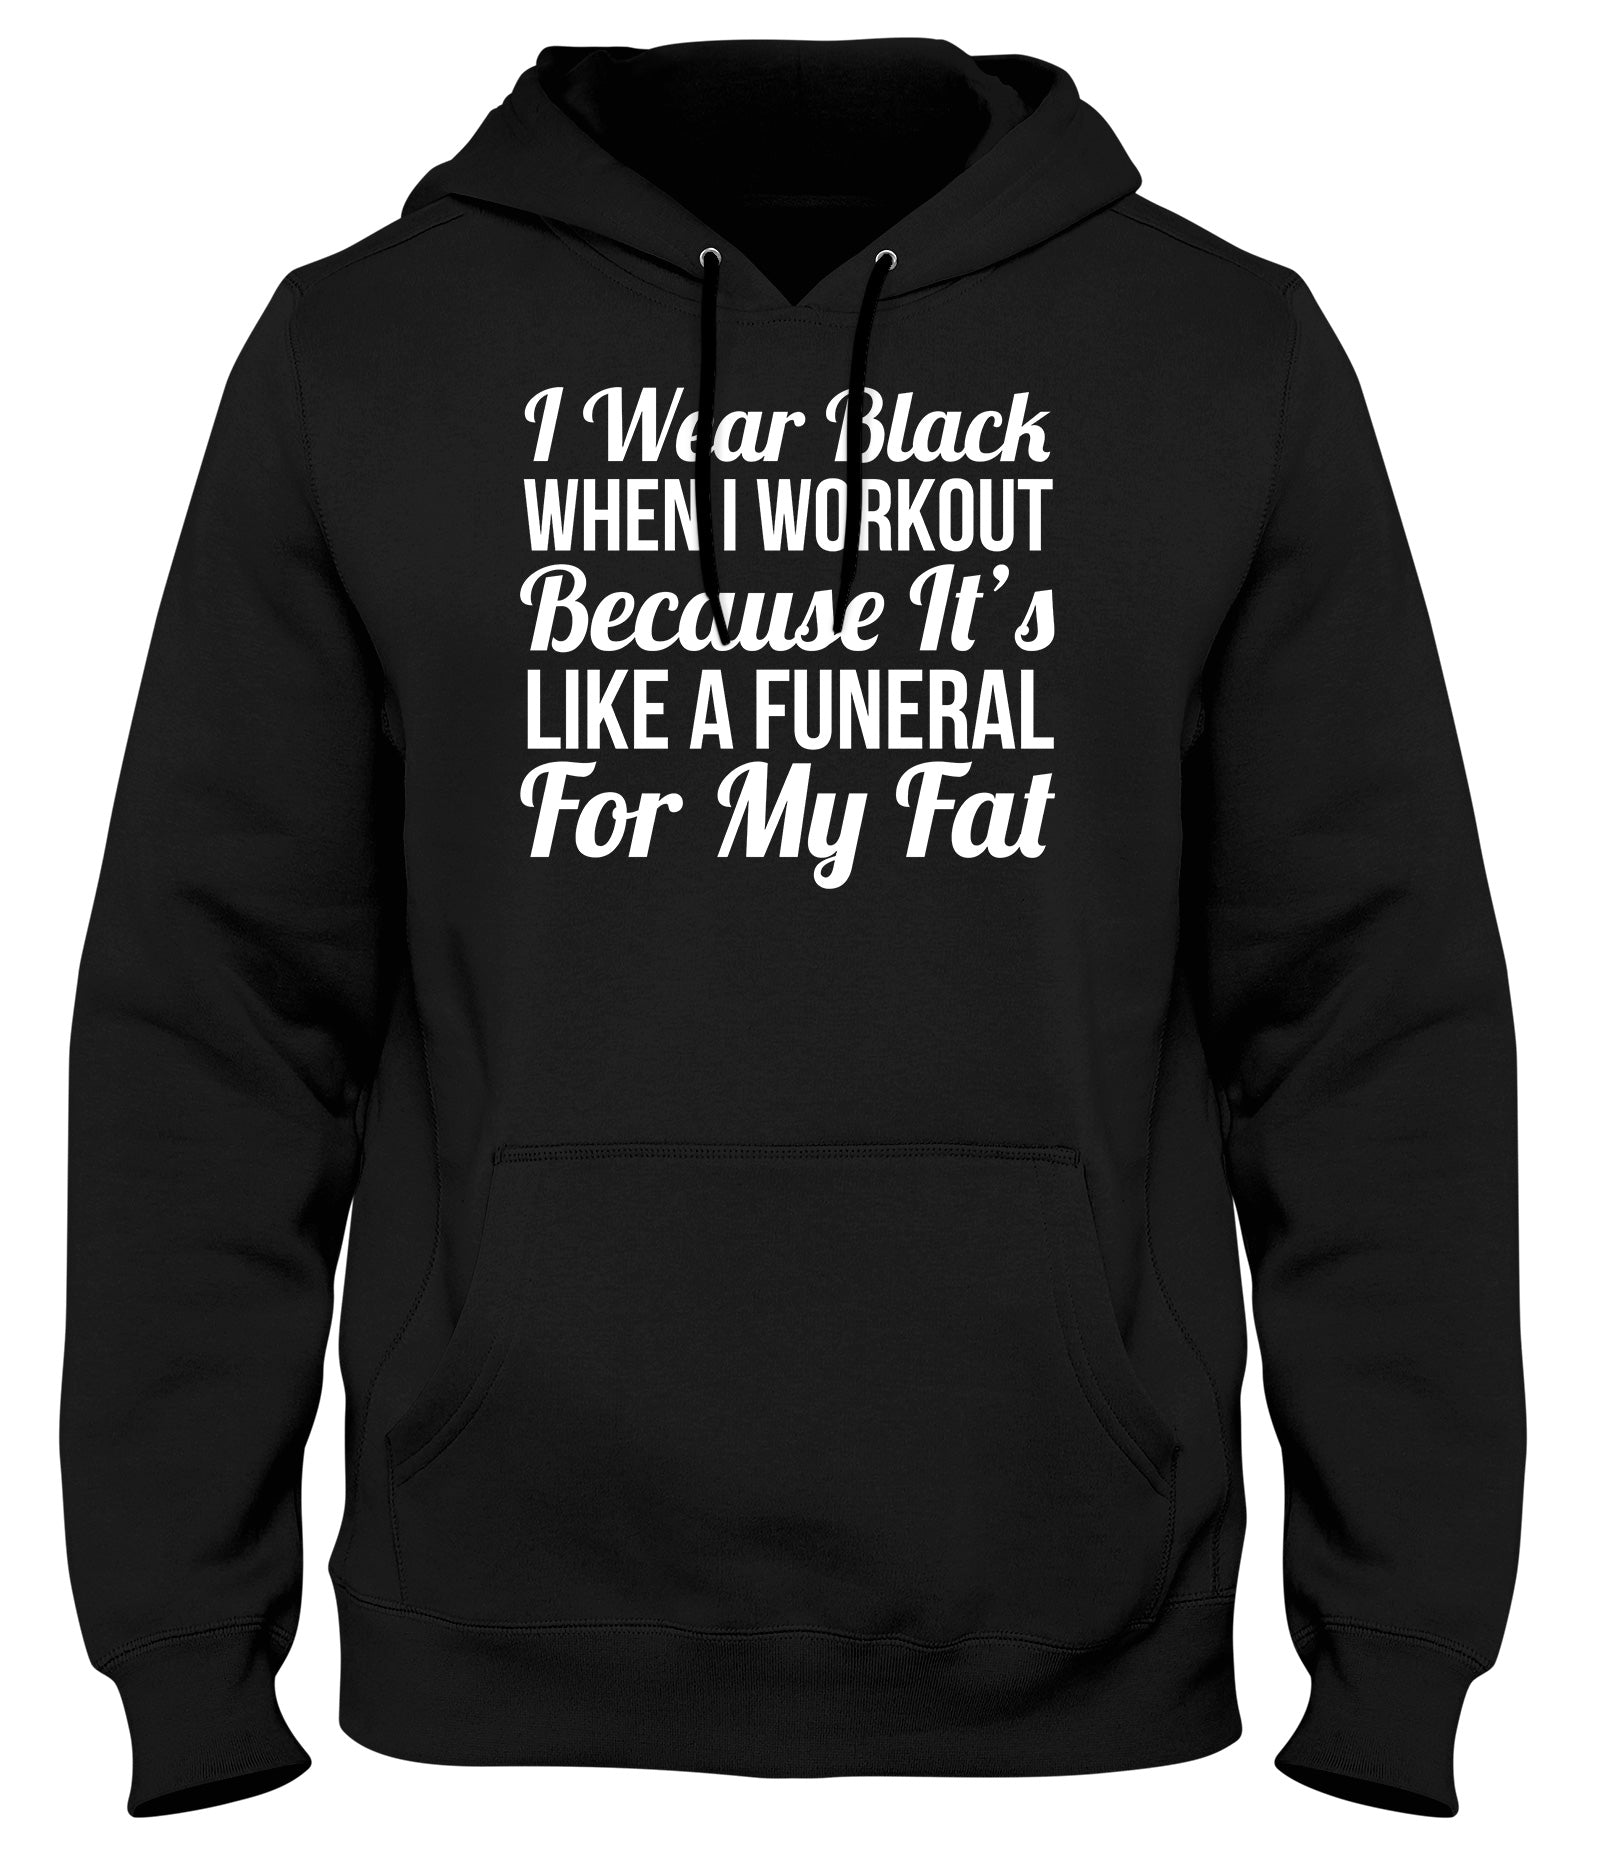 I WEAR BLACK WHEN I WORKOUT BECAUSE IT'S LIKE A FUNERAL FOR MY FAT WOMENS LADIES MENS UNISEX HOODIE